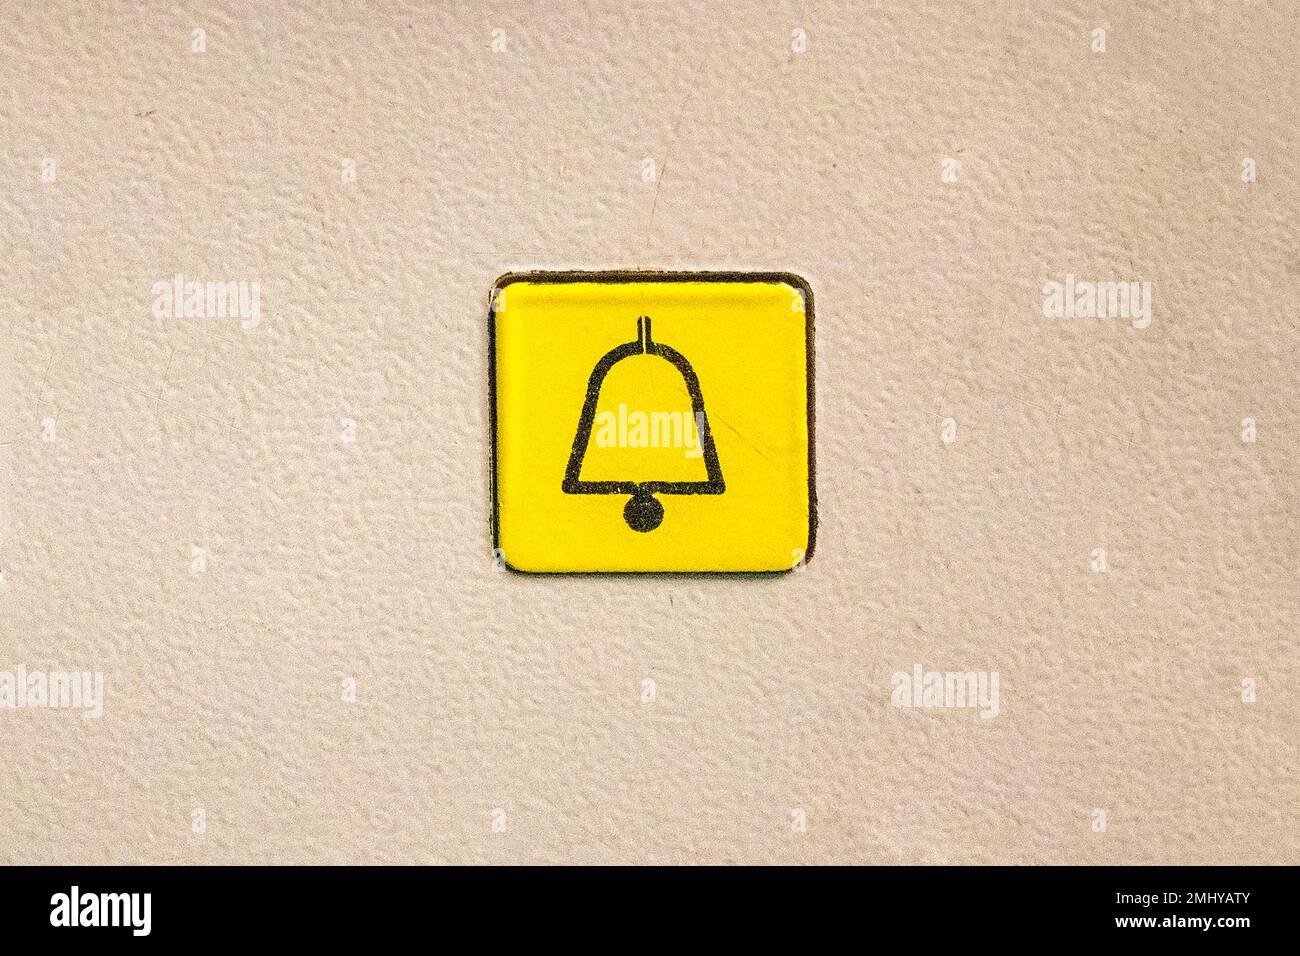 Single yellow square elevator button with a bell icon in a white background Stock Photo